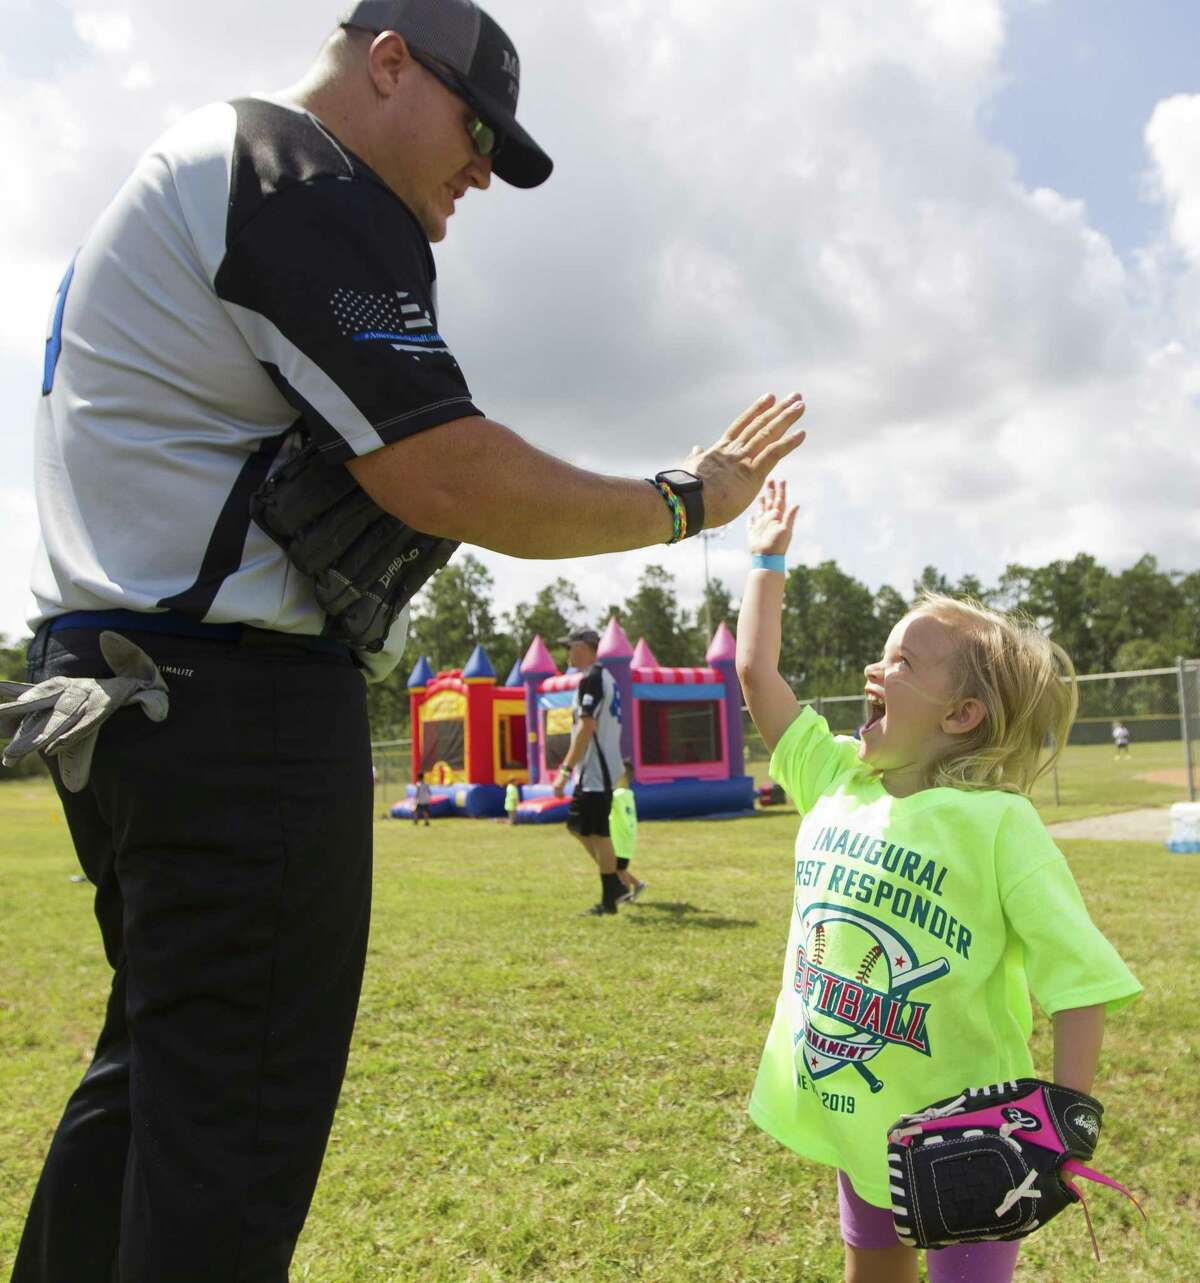 Montgomery County Sheriff’s Office Deputy Dylan Jobe gives a high-five to his daugher Edriana after catching a ball before the kids for cops game, as part of the inaugural Americans Stand United First Responder Softball Tournament at Carl Barton, Jr. Park, Saturday, June 15, 2019, in Conroe. Each child was pair with a firefighter or police officer as a coach for the game. The inaugural tournament brought together community members with 150 first responders from Montgomery and Harris County.